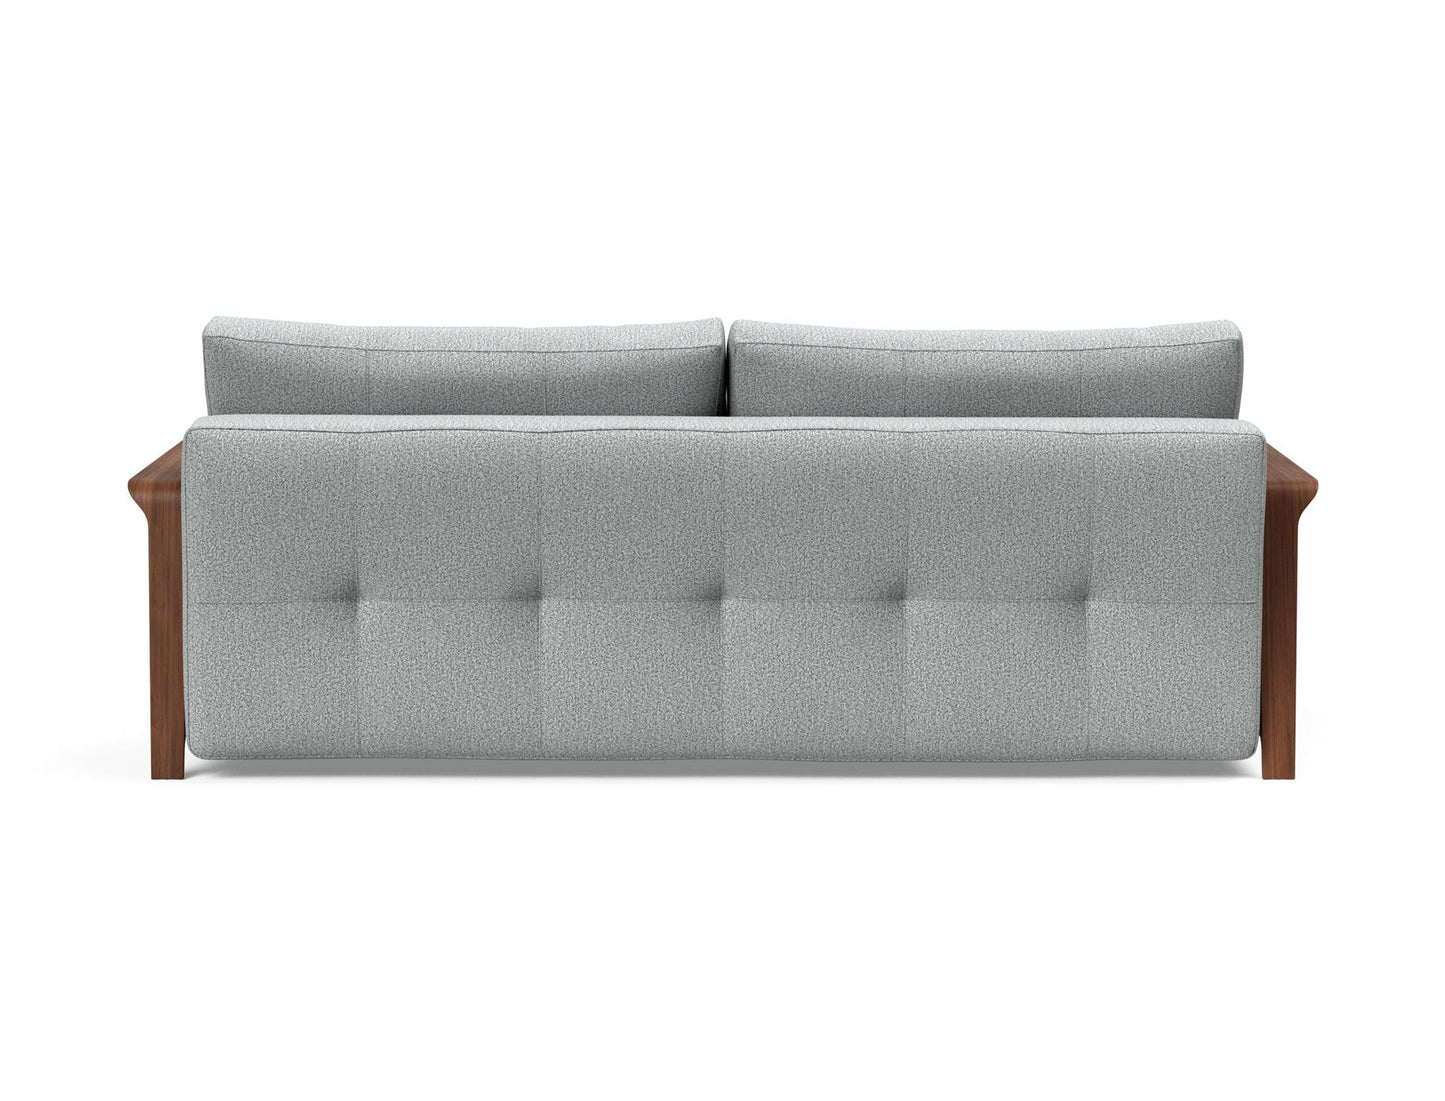 Innovation Living Ran Deluxe Excess Lounger Sofa